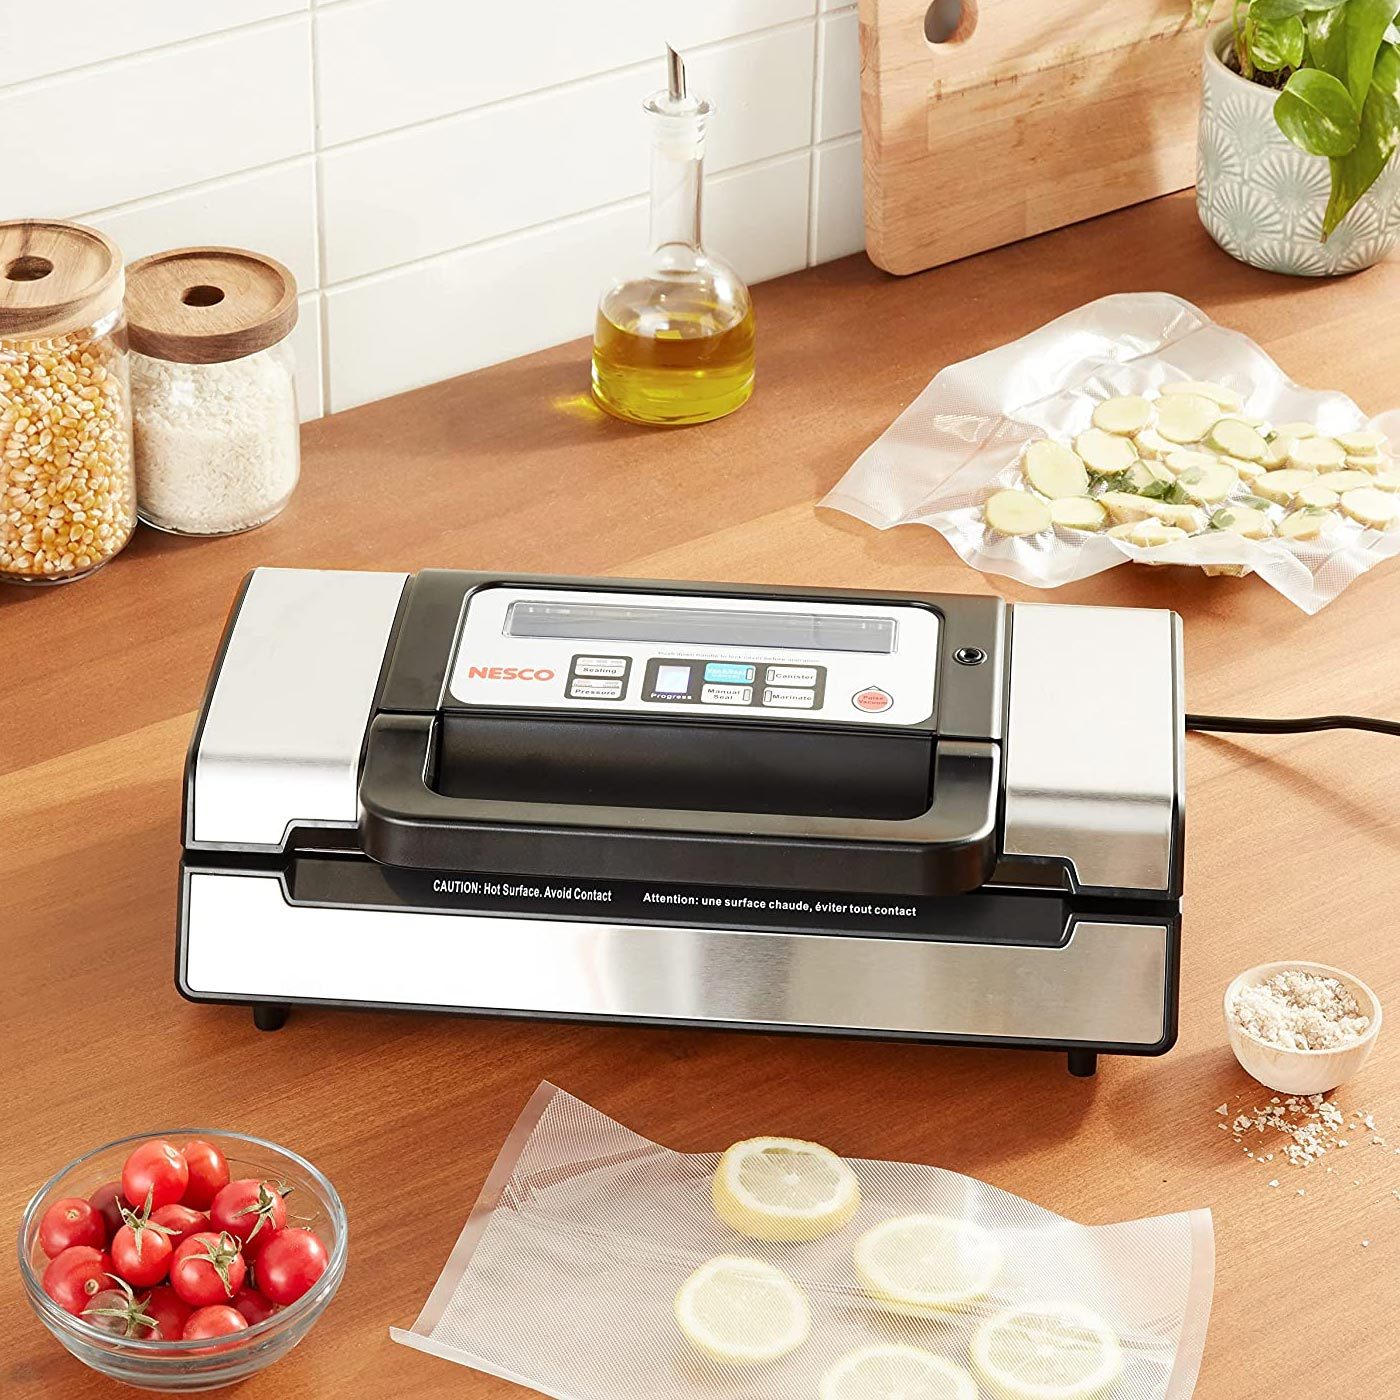 The Best Vacuum Sealer (2022), 9 Tested and Reviewed